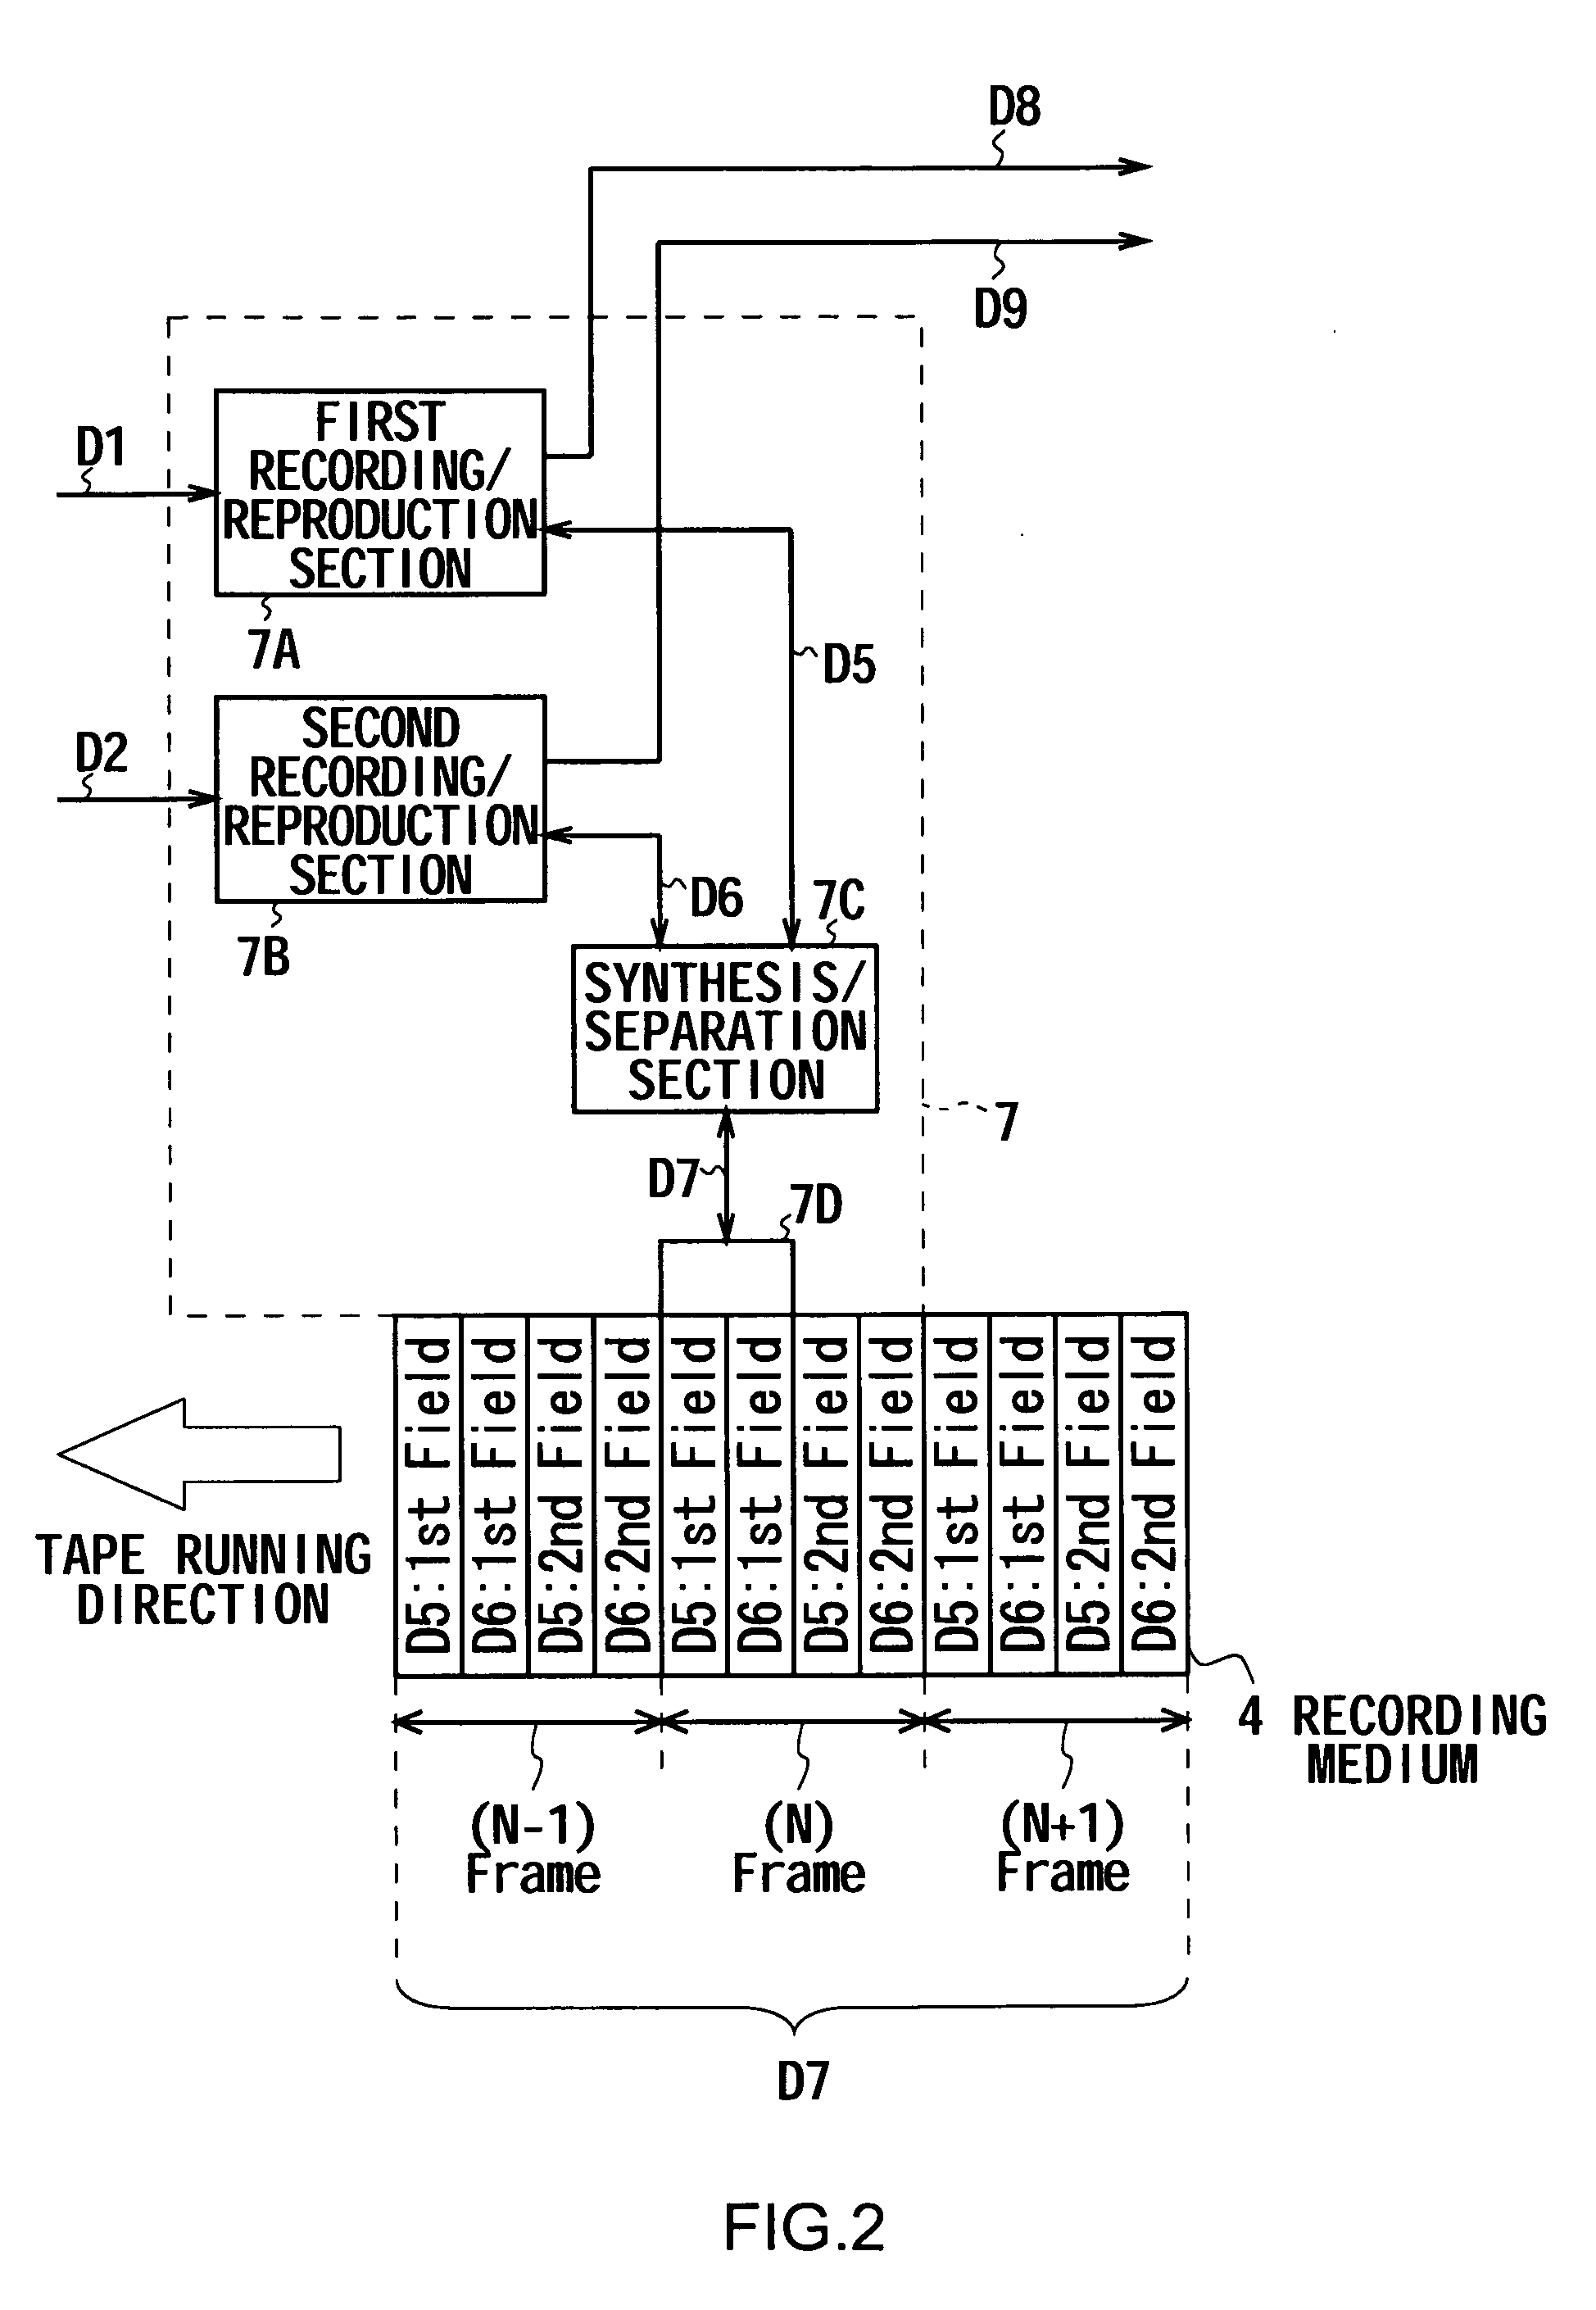 Recording/reproduction apparatus, and recording/reproduction method as well as stereoscopic image visual effects confirmation apparatus and stereoscopic image visual effects confirmation method